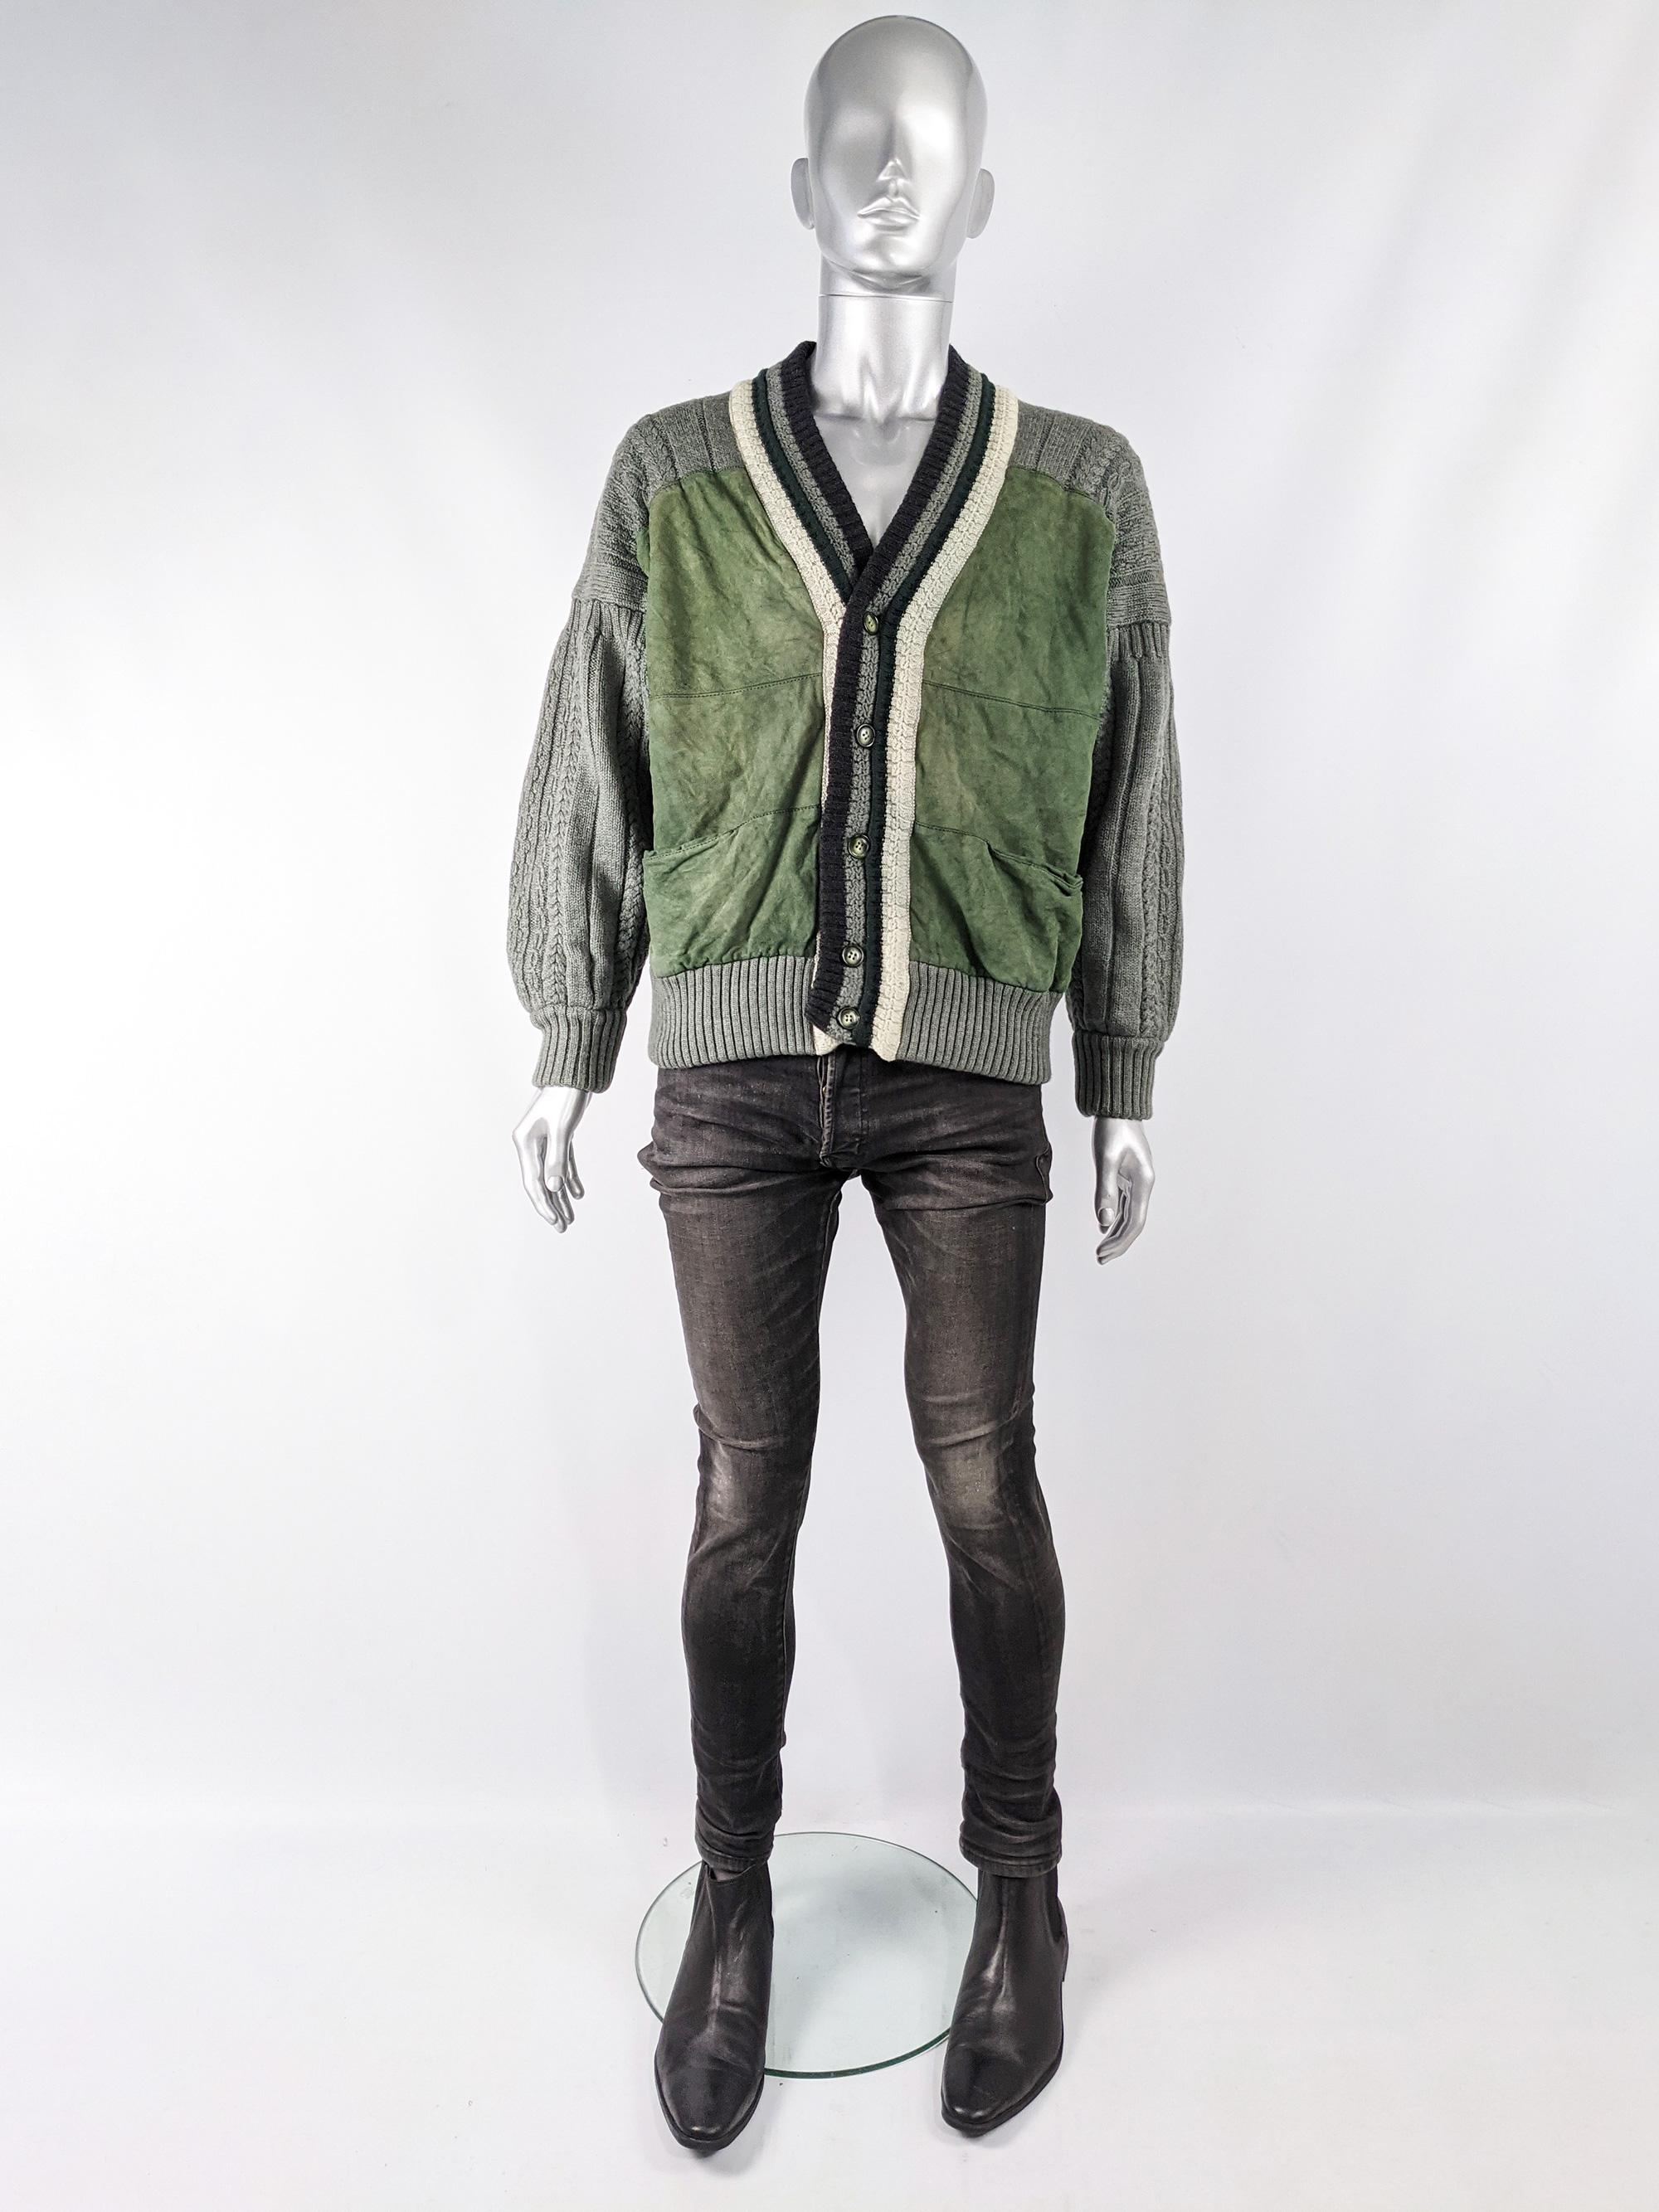 A stylish and rare vintage mens jacket from the 80s by luxury Italian fashion designer, Gianfranco Ferre (who was creative director of Dior from 1989-1996). In a green suede on the body with grey cable knit sleeves and back. The stripes on the front